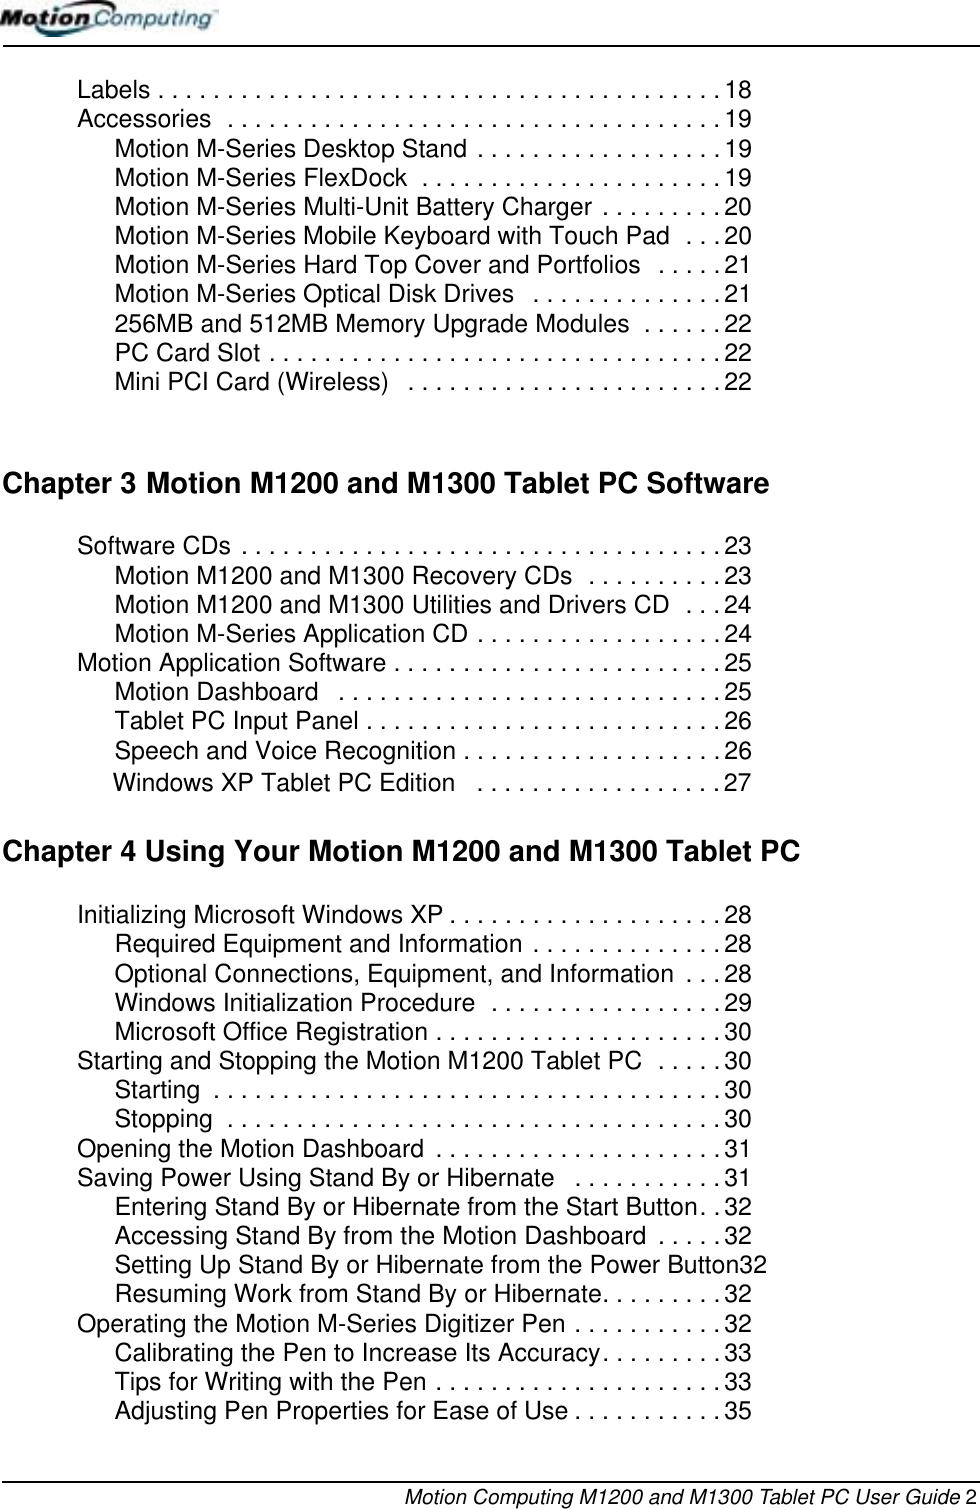 Motion Computing M1200 and M1300 Tablet PC User Guide 2Labels . . . . . . . . . . . . . . . . . . . . . . . . . . . . . . . . . . . . . . . . .18Accessories  . . . . . . . . . . . . . . . . . . . . . . . . . . . . . . . . . . . .19Motion M-Series Desktop Stand . . . . . . . . . . . . . . . . . .19Motion M-Series FlexDock  . . . . . . . . . . . . . . . . . . . . . . 19Motion M-Series Multi-Unit Battery Charger . . . . . . . . .20 Motion M-Series Mobile Keyboard with Touch Pad  . . . 20Motion M-Series Hard Top Cover and Portfolios  . . . . . 21Motion M-Series Optical Disk Drives   . . . . . . . . . . . . . . 21256MB and 512MB Memory Upgrade Modules  . . . . . . 22PC Card Slot . . . . . . . . . . . . . . . . . . . . . . . . . . . . . . . . .22Mini PCI Card (Wireless)   . . . . . . . . . . . . . . . . . . . . . . . 22Chapter 3 Motion M1200 and M1300 Tablet PC SoftwareSoftware CDs . . . . . . . . . . . . . . . . . . . . . . . . . . . . . . . . . . . 23Motion M1200 and M1300 Recovery CDs  . . . . . . . . . . 23Motion M1200 and M1300 Utilities and Drivers CD  . . . 24Motion M-Series Application CD . . . . . . . . . . . . . . . . . . 24Motion Application Software . . . . . . . . . . . . . . . . . . . . . . . . 25Motion Dashboard   . . . . . . . . . . . . . . . . . . . . . . . . . . . .25Tablet PC Input Panel . . . . . . . . . . . . . . . . . . . . . . . . . . 26Speech and Voice Recognition . . . . . . . . . . . . . . . . . . . 26                Windows XP Tablet PC Edition   . . . . . . . . . . . . . . . . . .27Chapter 4 Using Your Motion M1200 and M1300 Tablet PCInitializing Microsoft Windows XP . . . . . . . . . . . . . . . . . . . .28Required Equipment and Information . . . . . . . . . . . . . . 28Optional Connections, Equipment, and Information  . . . 28Windows Initialization Procedure  . . . . . . . . . . . . . . . . . 29Microsoft Office Registration . . . . . . . . . . . . . . . . . . . . .30Starting and Stopping the Motion M1200 Tablet PC  . . . . . 30Starting  . . . . . . . . . . . . . . . . . . . . . . . . . . . . . . . . . . . . .30Stopping  . . . . . . . . . . . . . . . . . . . . . . . . . . . . . . . . . . . .30Opening the Motion Dashboard  . . . . . . . . . . . . . . . . . . . . . 31Saving Power Using Stand By or Hibernate   . . . . . . . . . . . 31Entering Stand By or Hibernate from the Start Button. .32Accessing Stand By from the Motion Dashboard  . . . . . 32Setting Up Stand By or Hibernate from the Power Button32Resuming Work from Stand By or Hibernate. . . . . . . . . 32Operating the Motion M-Series Digitizer Pen . . . . . . . . . . . 32Calibrating the Pen to Increase Its Accuracy. . . . . . . . . 33Tips for Writing with the Pen . . . . . . . . . . . . . . . . . . . . . 33Adjusting Pen Properties for Ease of Use . . . . . . . . . . . 35